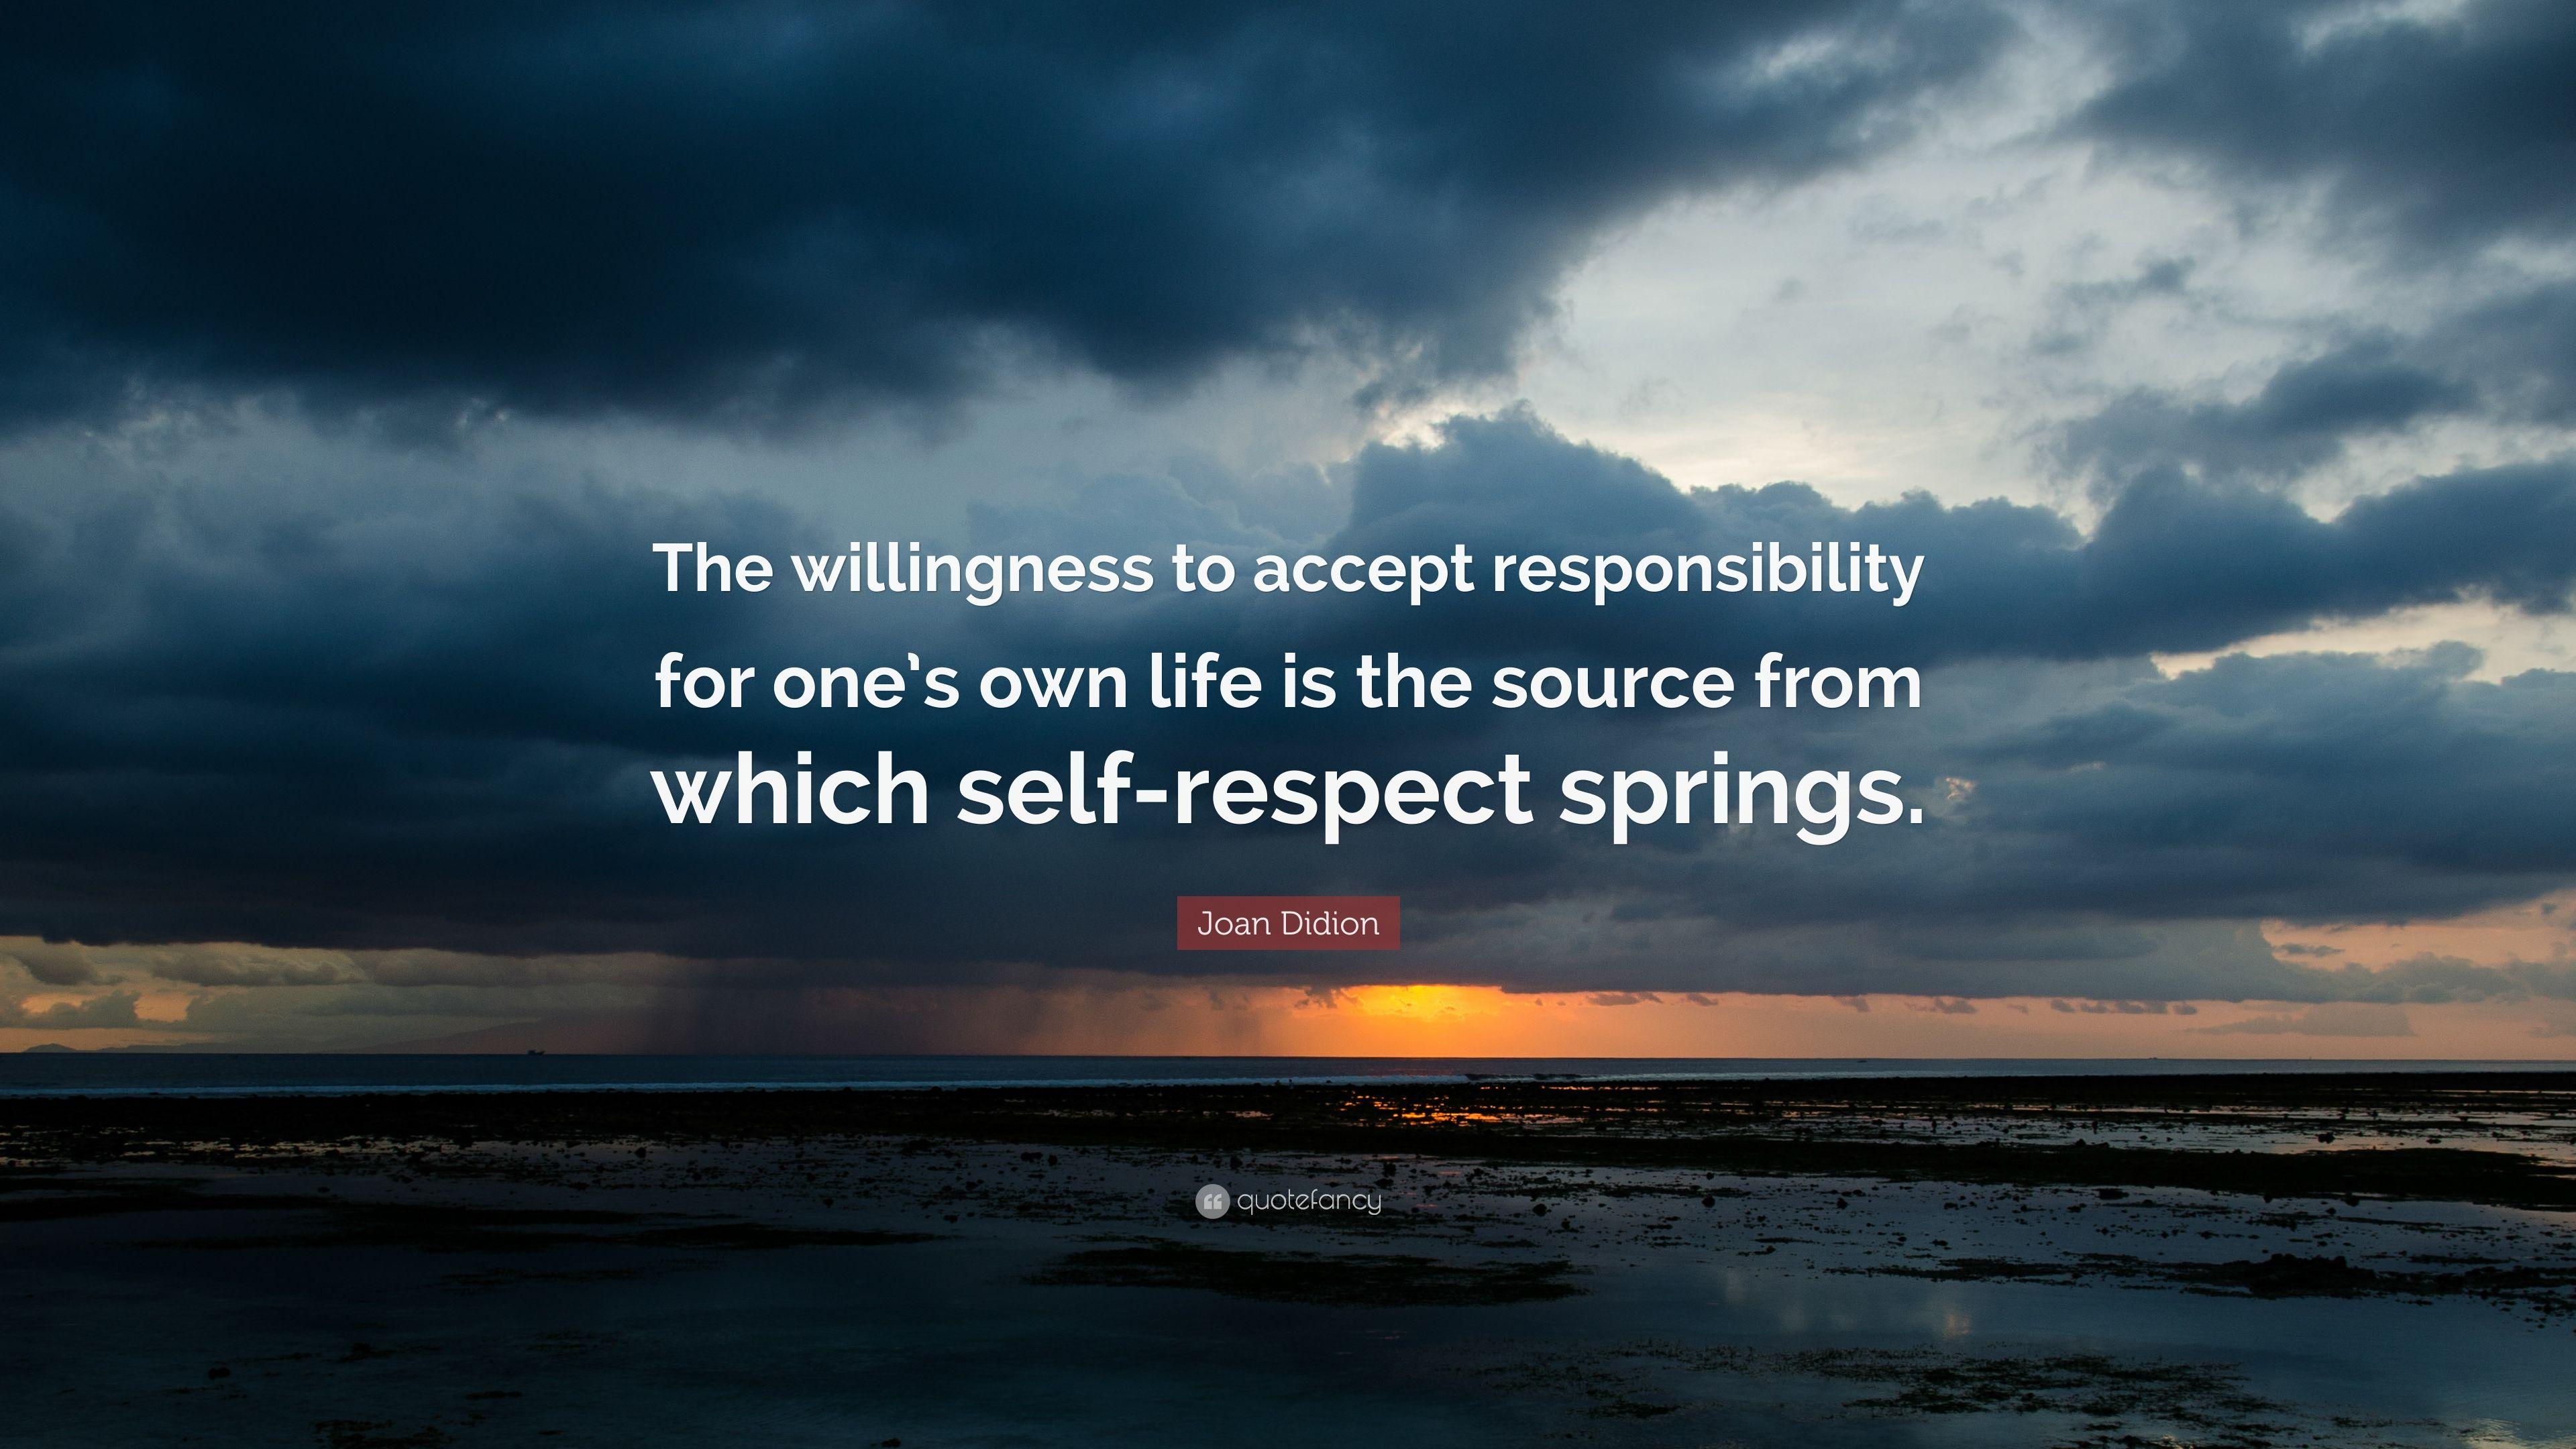 Joan Didion Quote: “The willingness to accept responsibility